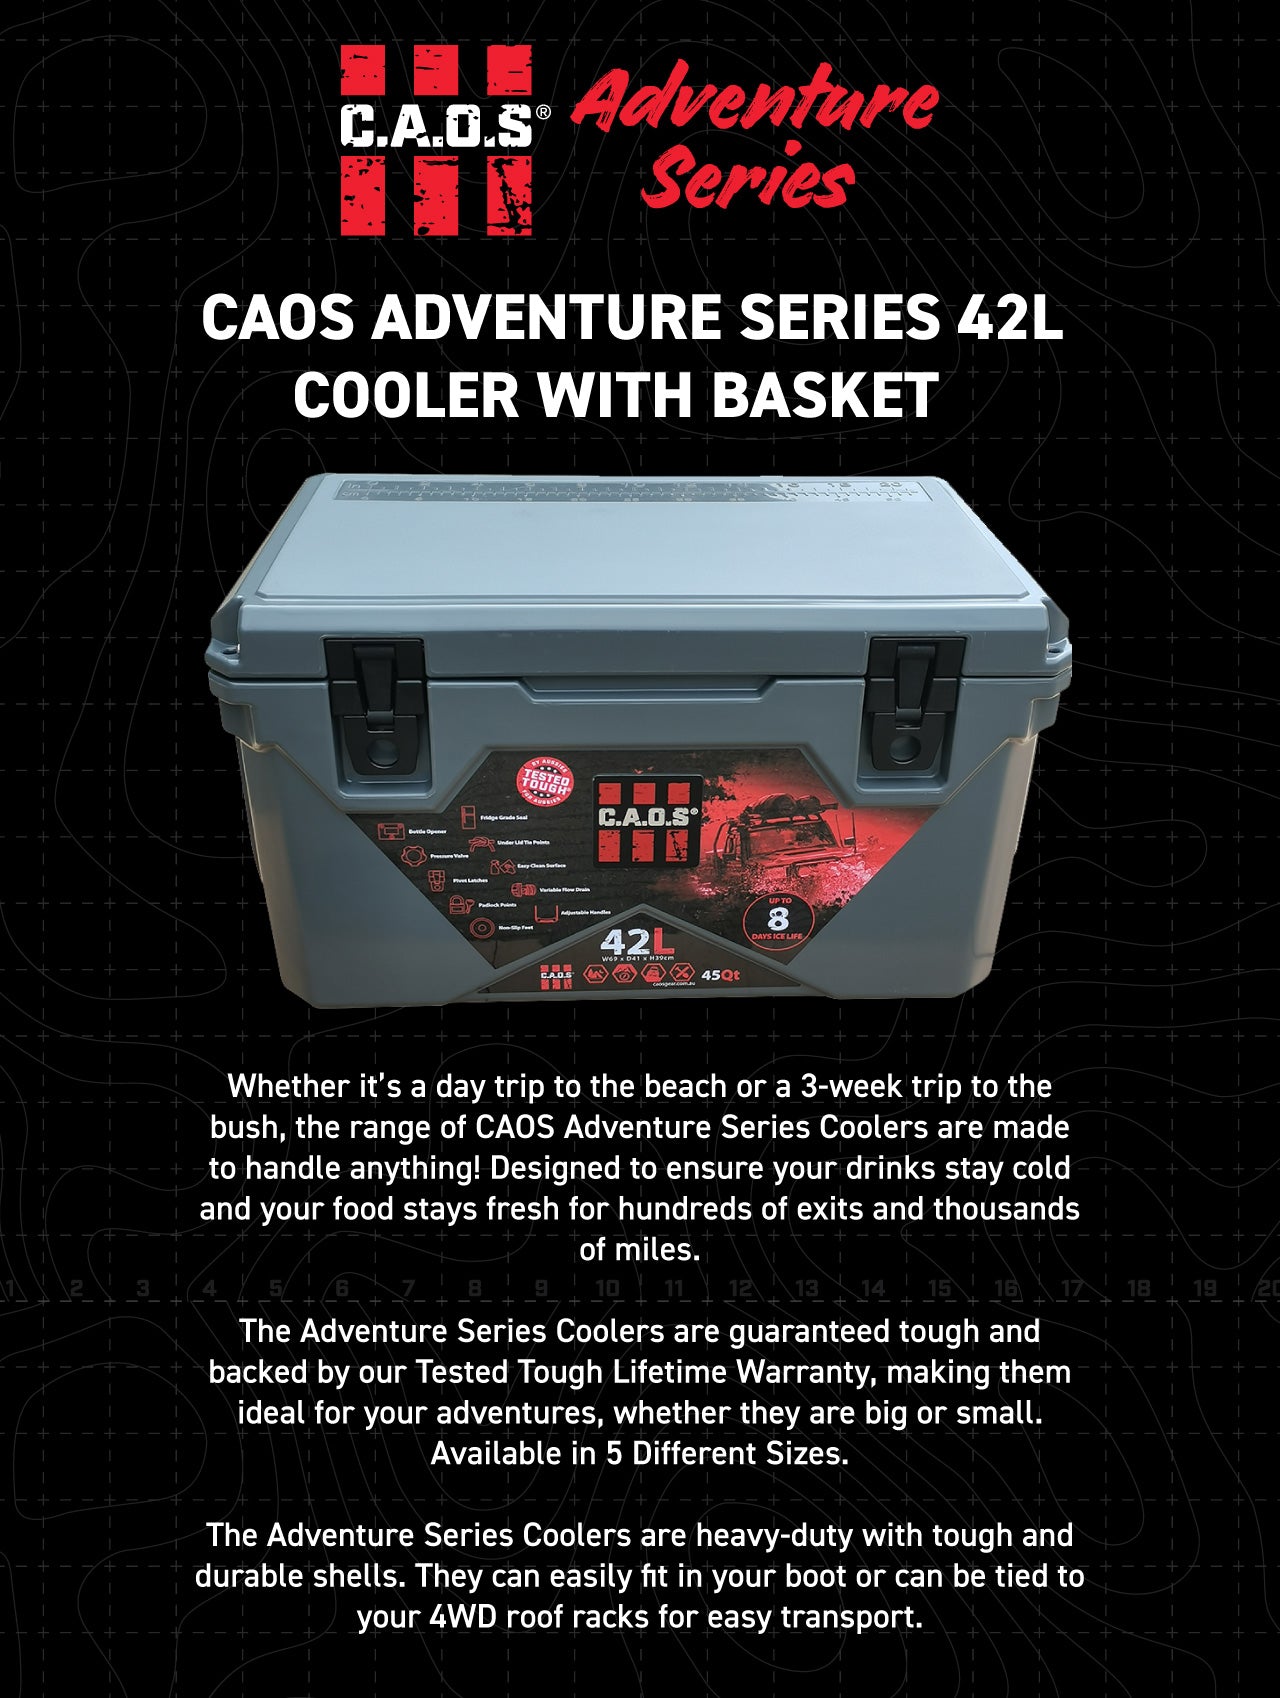 The Adventure Series Coolers are heavy-duty with tough and durable shells. They can easily fit in your boot or can be tied to your 4WD roof racks for easy transport.